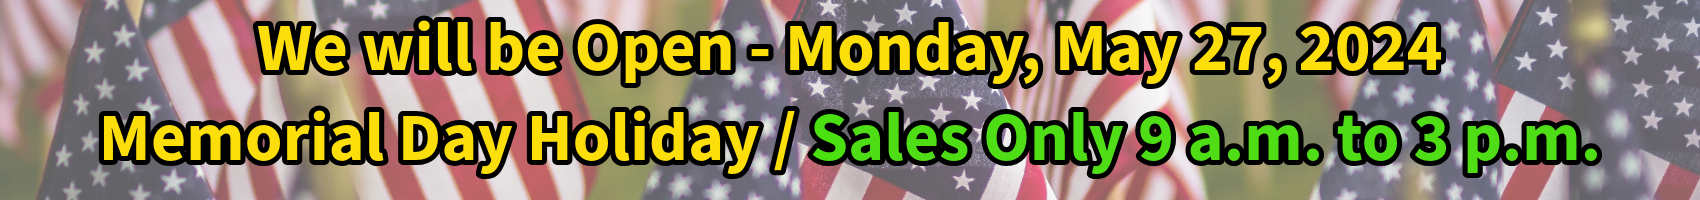 Memorial day holiday hours banner May 2024